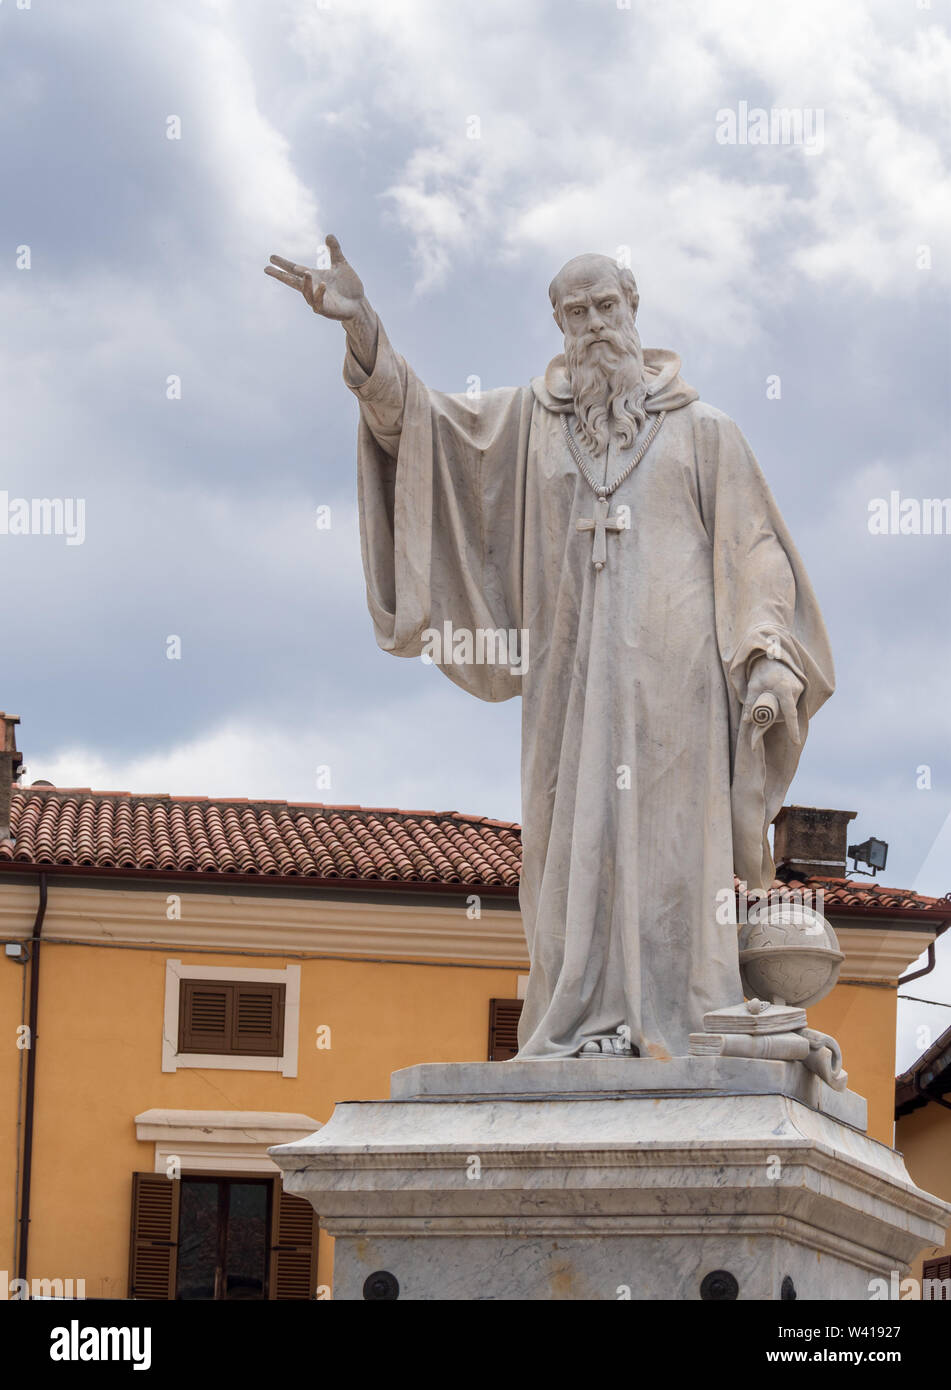 NORCIA, ITALY JULY 13, 2019: Three years after a devastating earthquake, much work still needs to be done. The statue of Saint Benedict in the square. Stock Photo